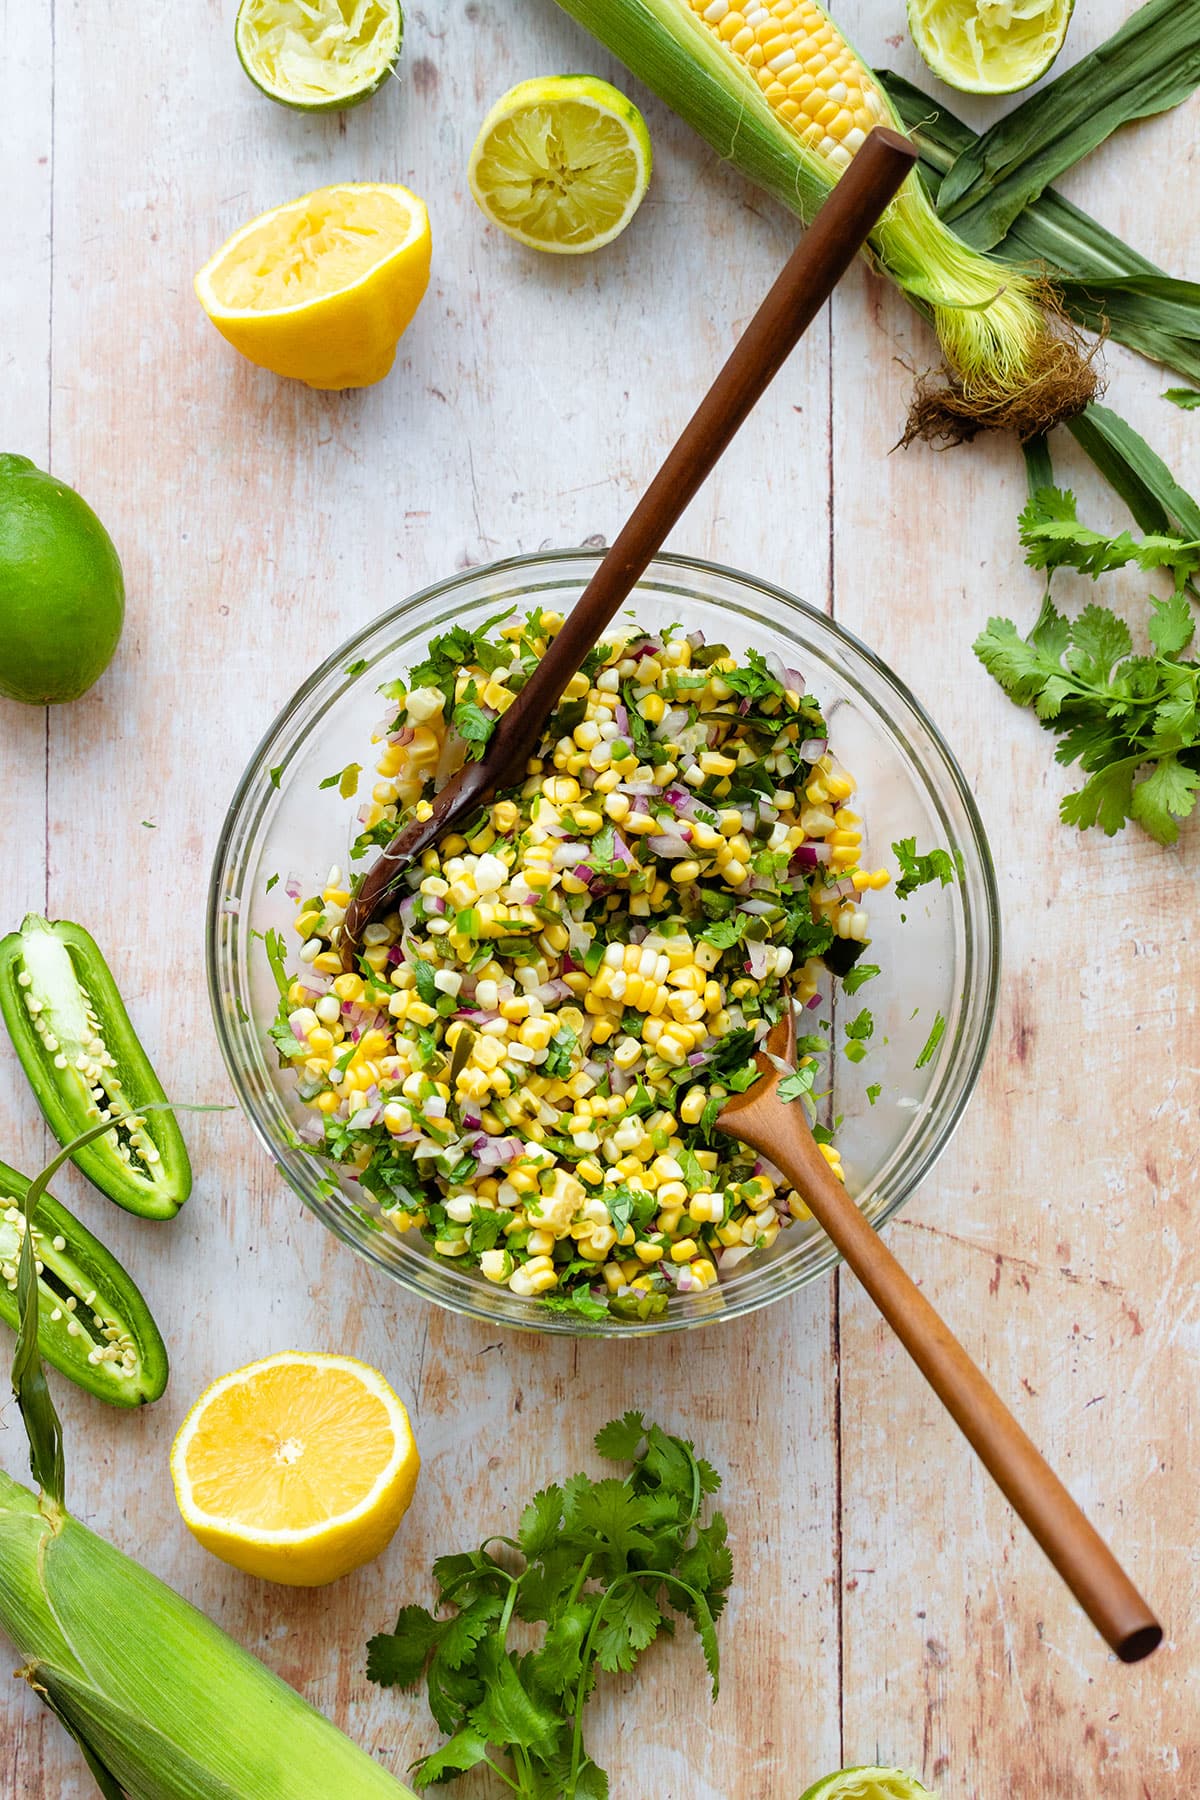 Corn salsa in a glass bowl with two wooden mixing spoons in it. There are more tortilla chips, fresh cilantro, corn, and jalapenos around. All on a light wooden background.